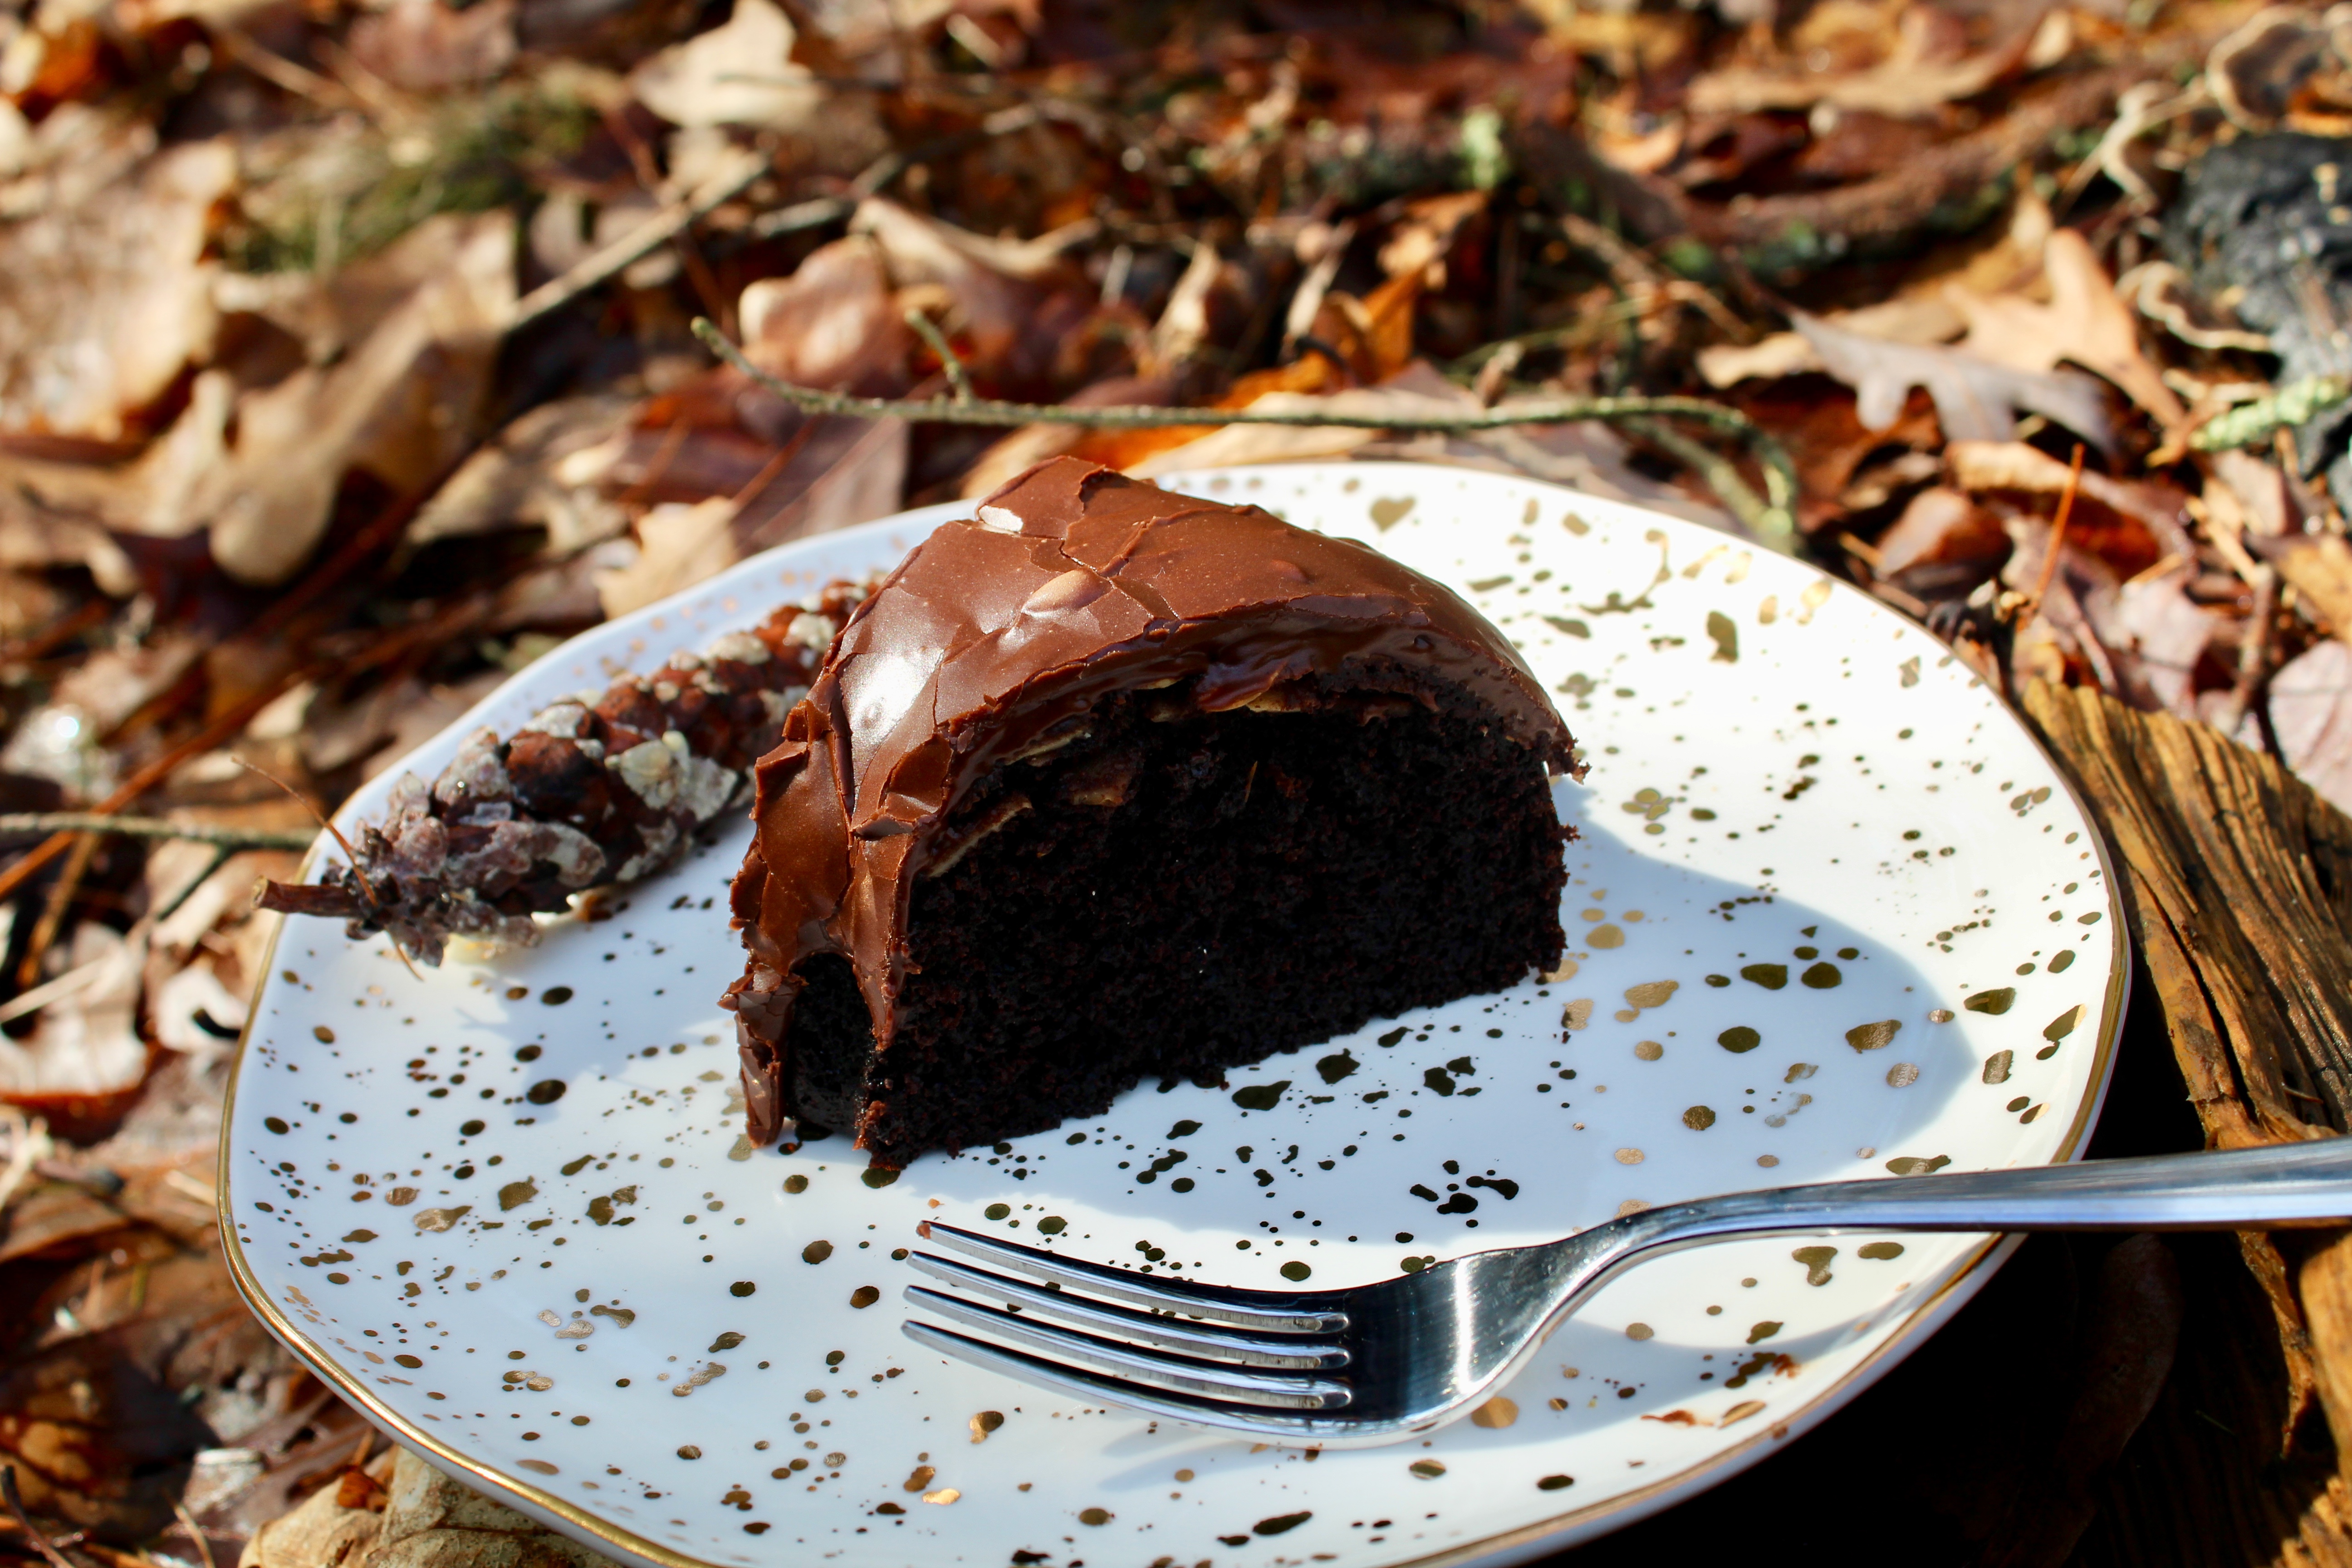 Whether enjoyed in the woods or at at the table this cake is delicious!